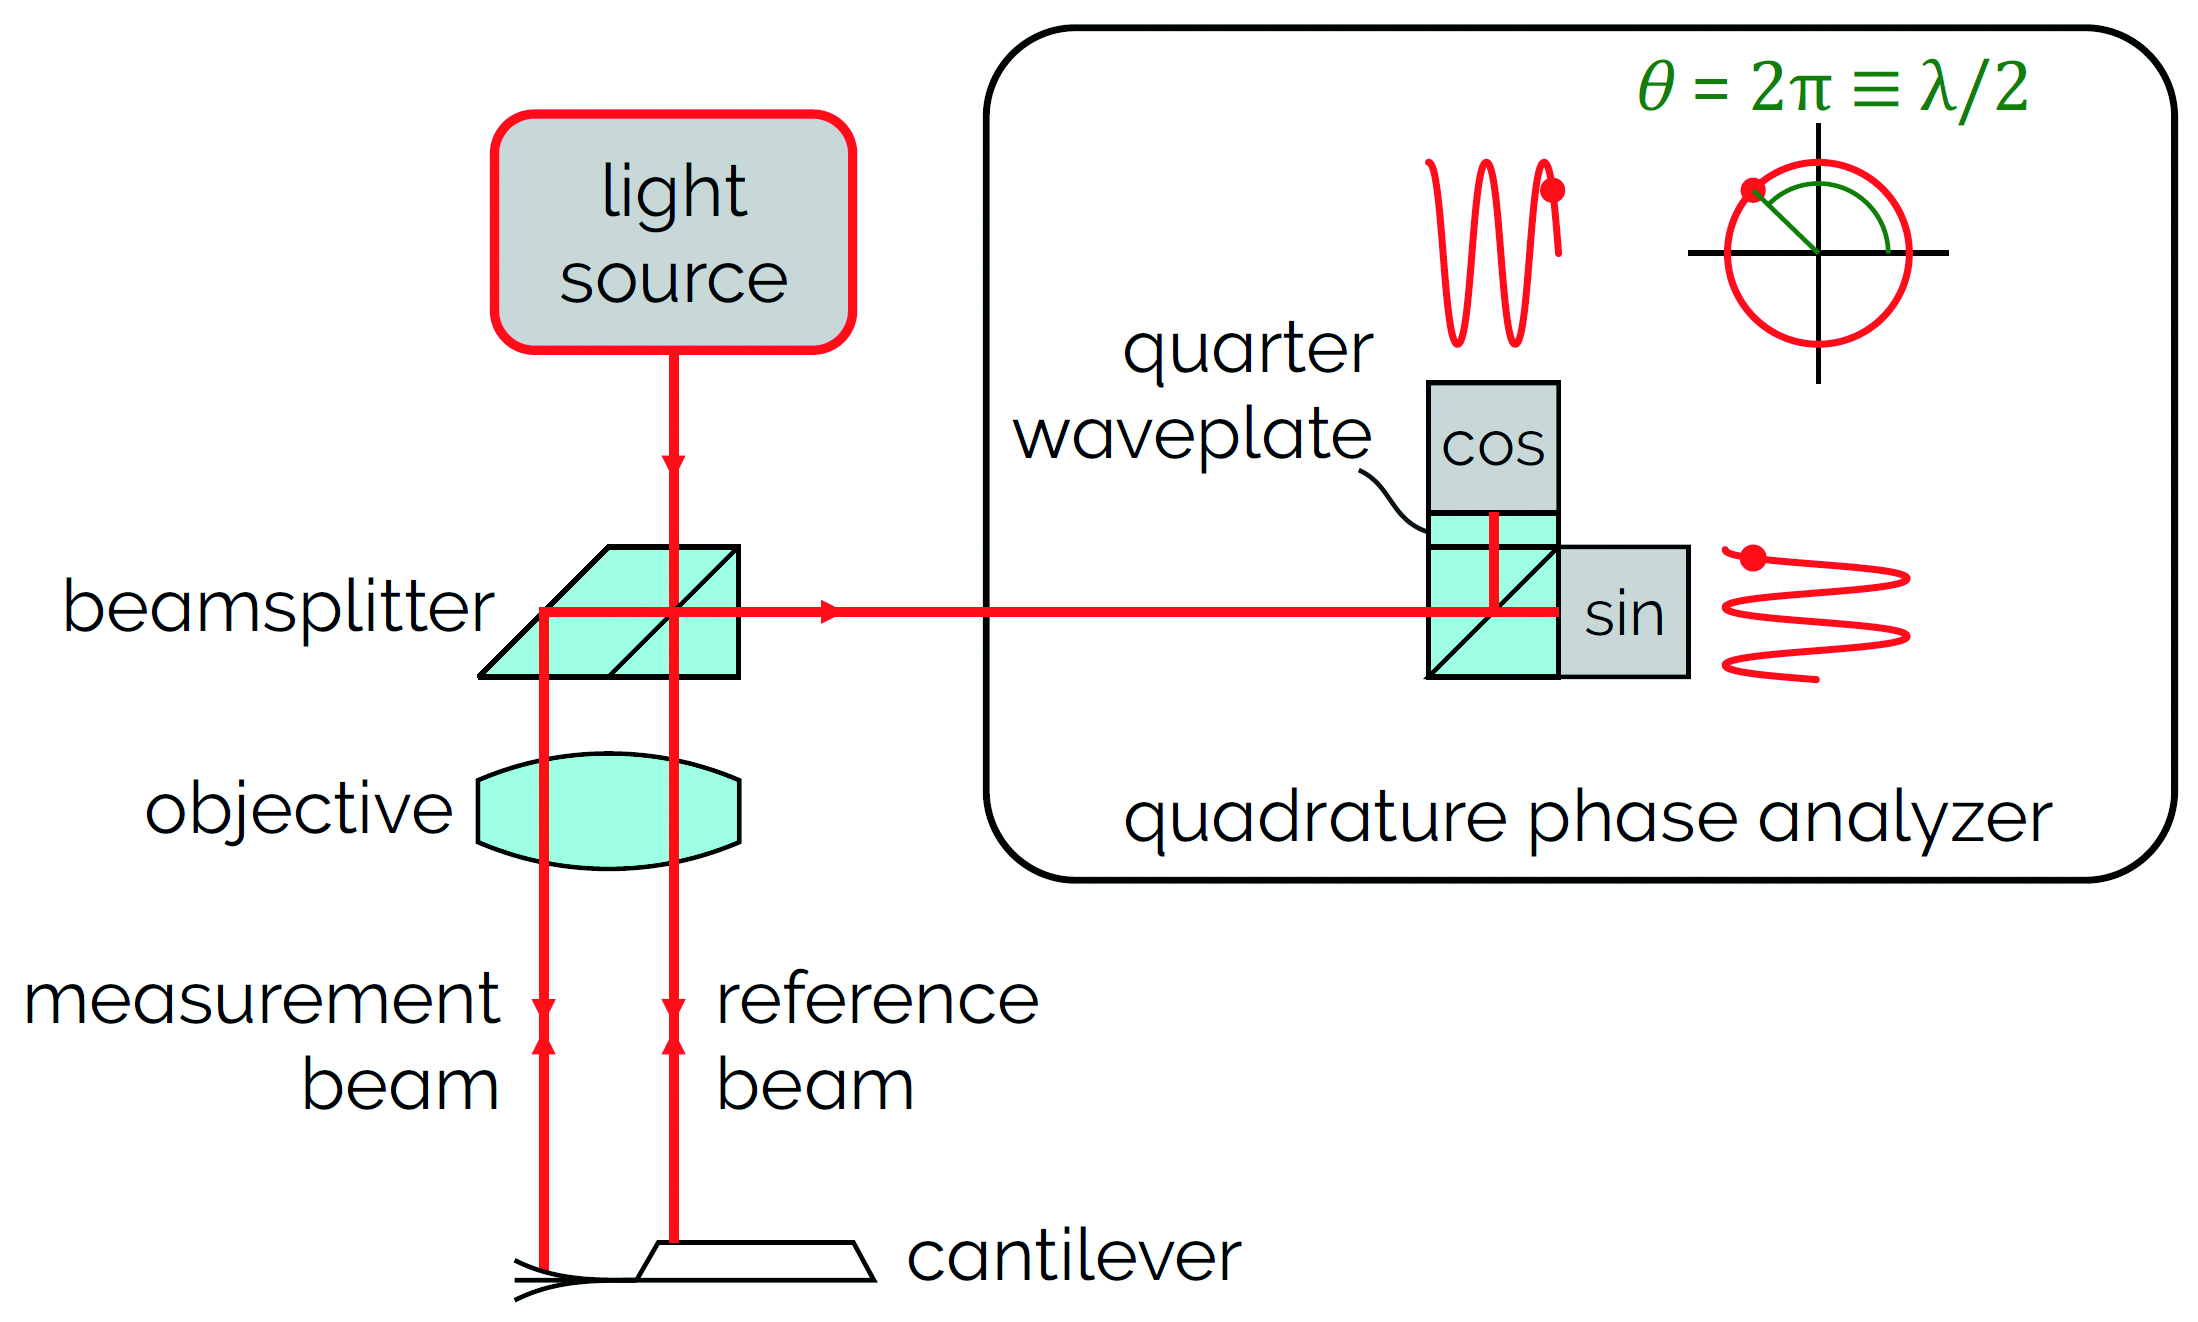 Diagram of the QPDI principle used to measure cantilever displacement in an AFM. A light beam is split into two beams that are focused onto the cantilever and the backside of the chip.  A quadrature phase analyzer measures the difference in the distance travelled  by both beams to determine the displacement of the cantilever. A full 2π cycle in phase is equivalent to a λ/2 displacement, and multiple cycles may.